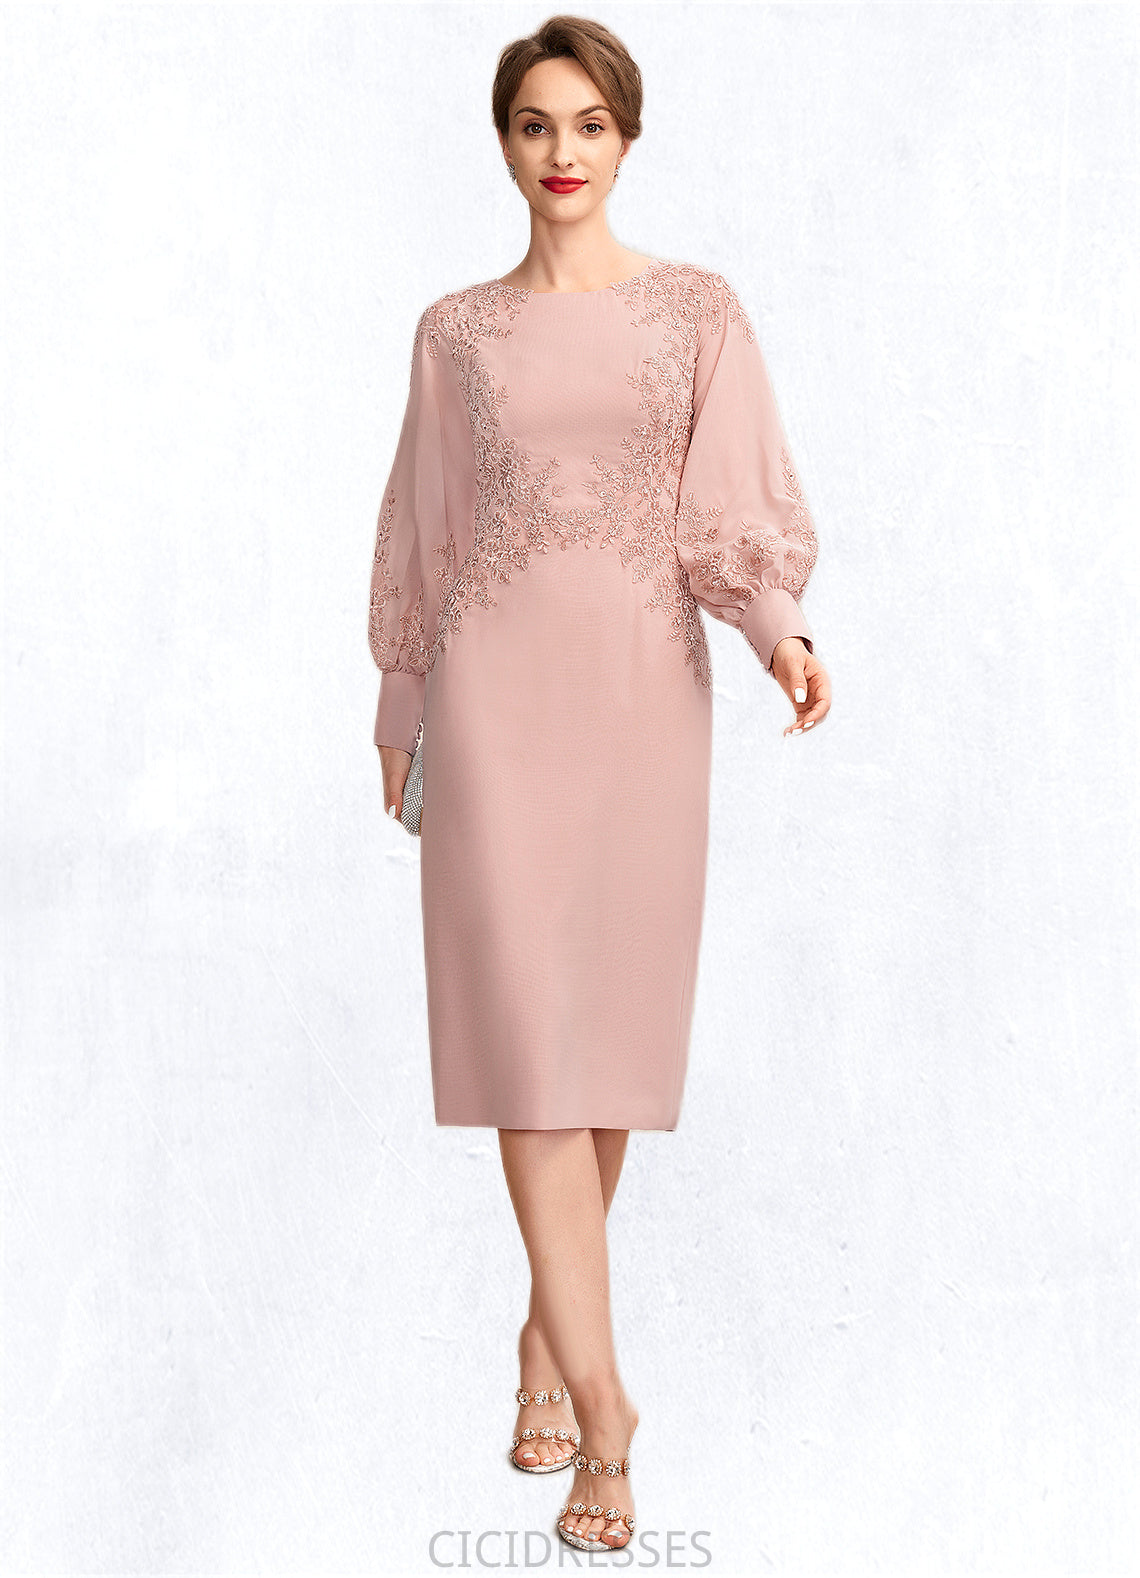 Michaela Sheath/Column Scoop Neck Knee-Length Chiffon Lace Mother of the Bride Dress With Beading Sequins CIC8126P0015020